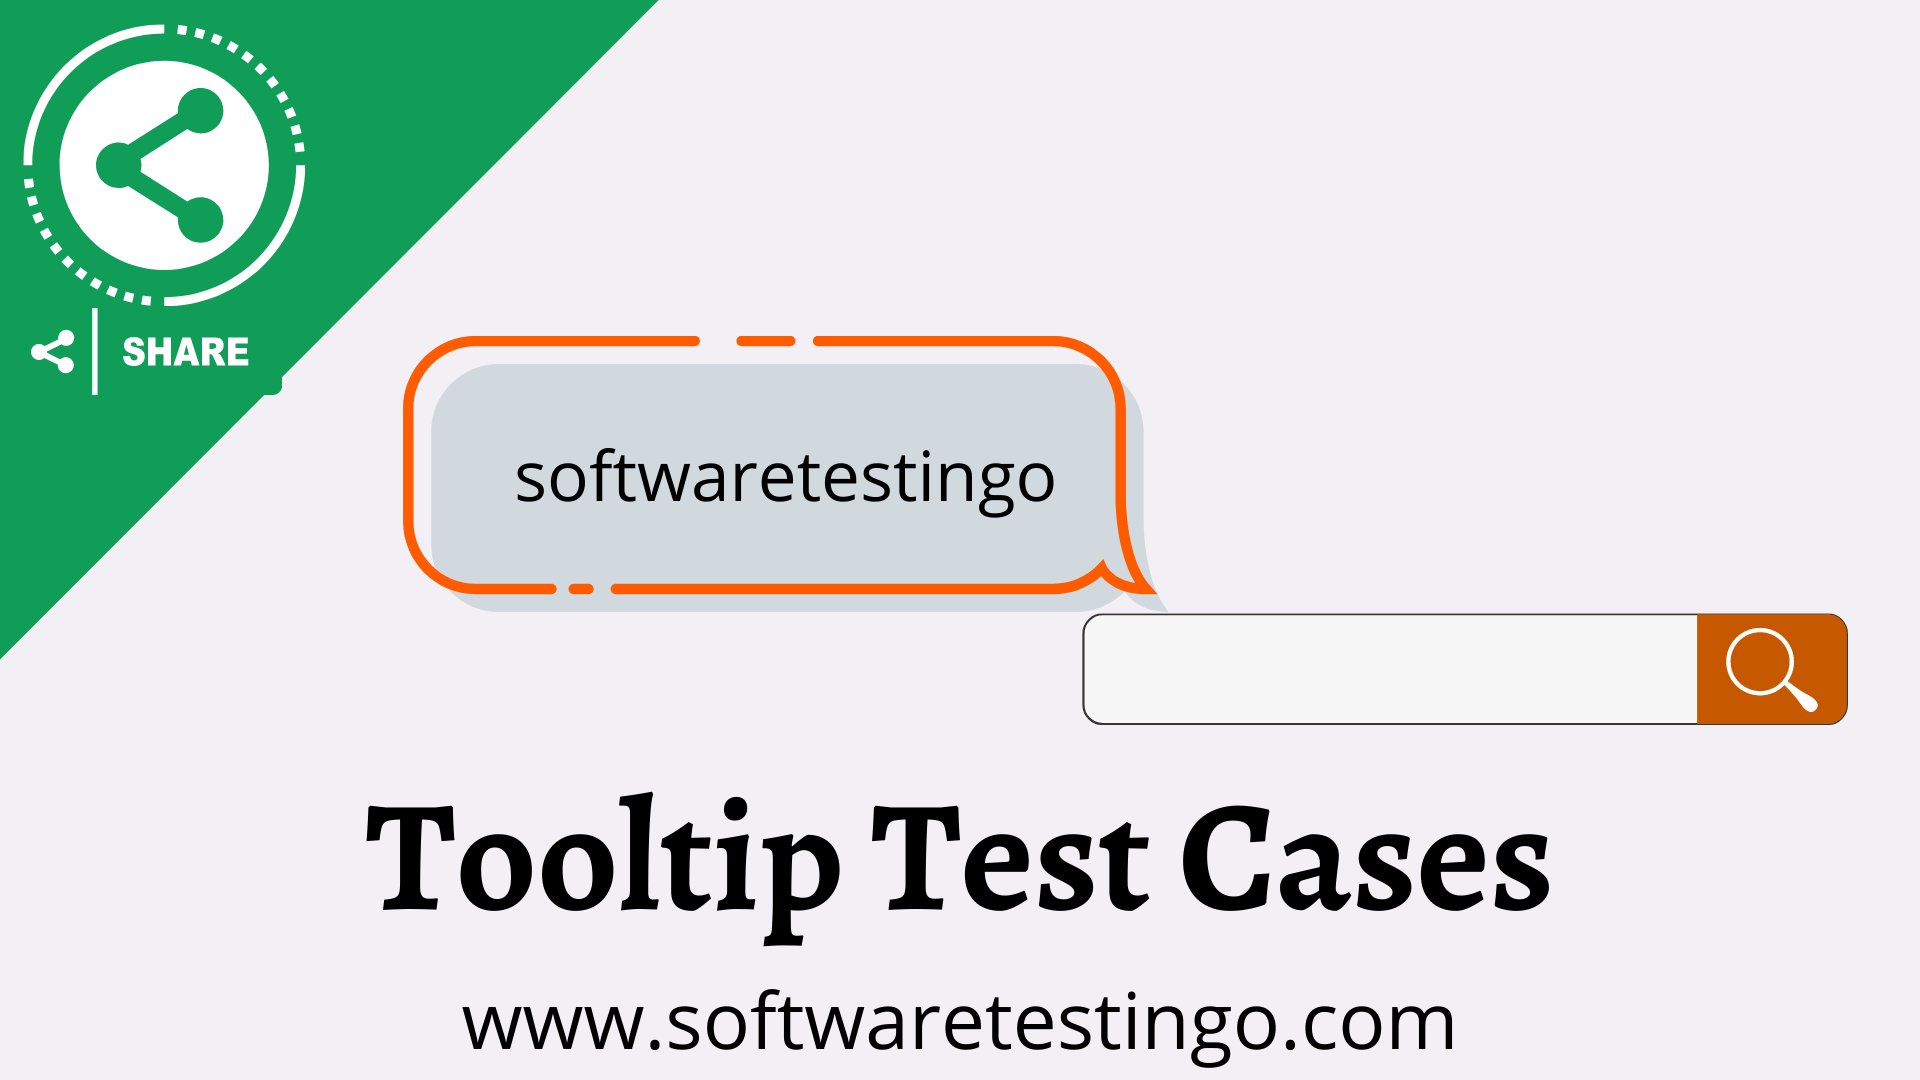 Test Cases For Tooltip